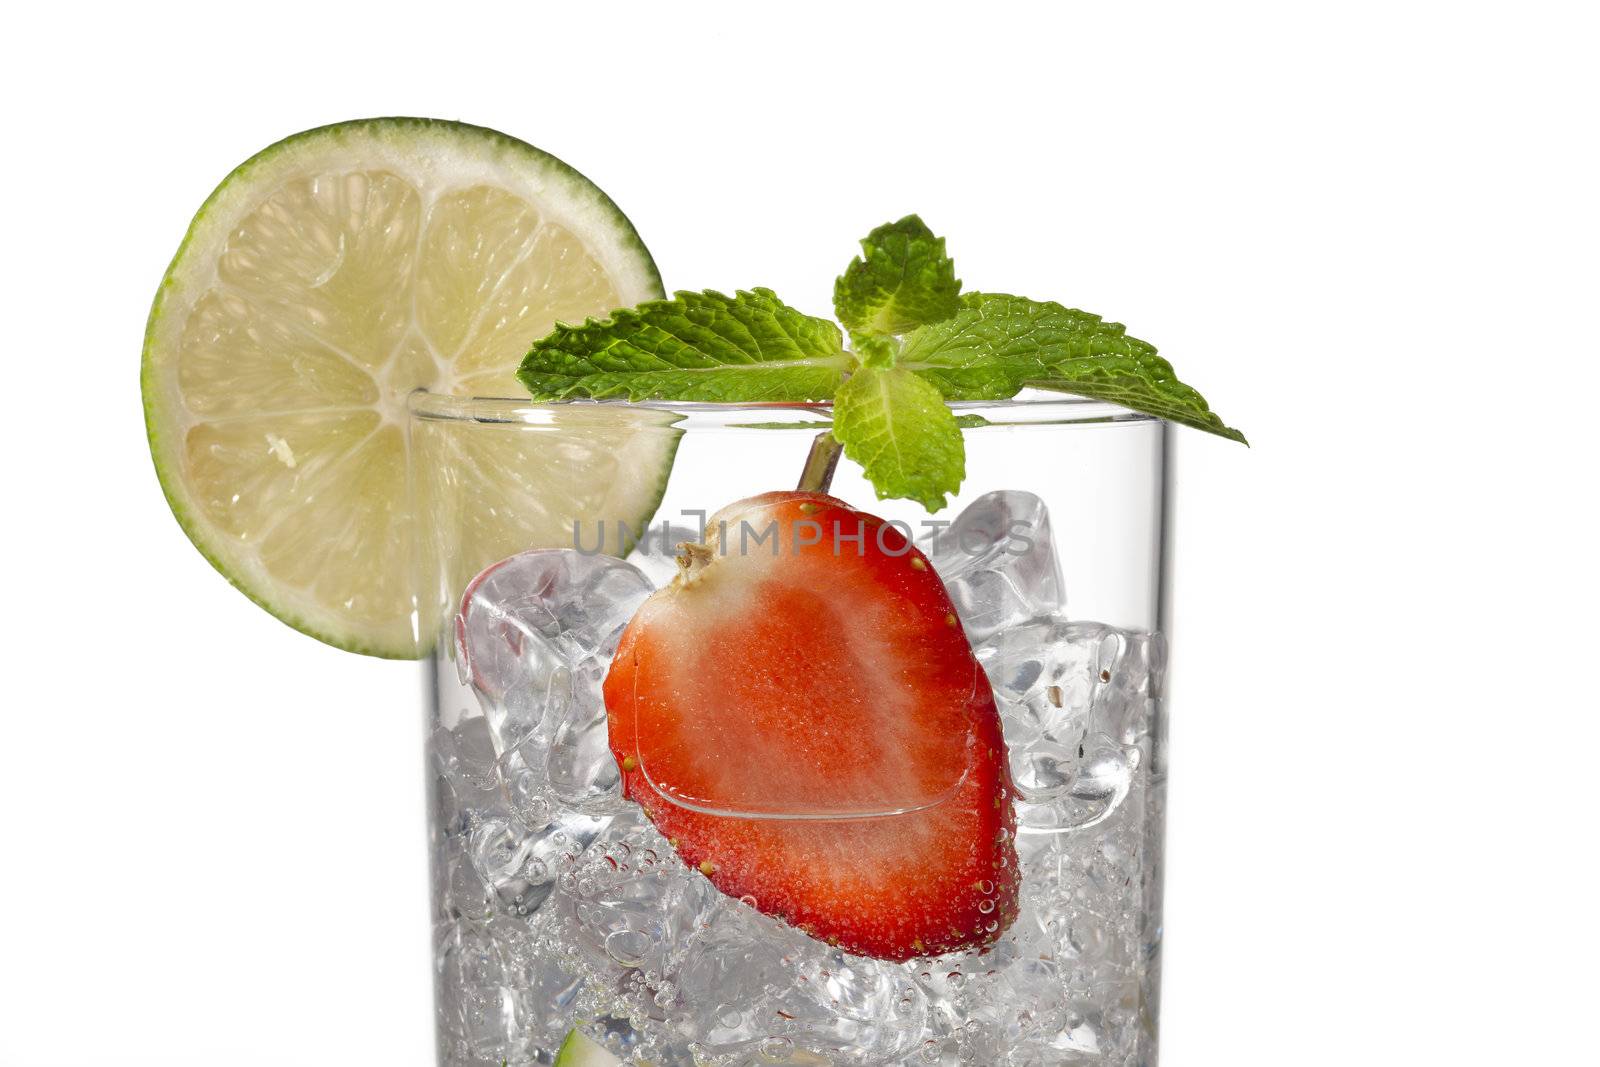 cropped image of a glass with ice cubes  strawberry slice and lemon